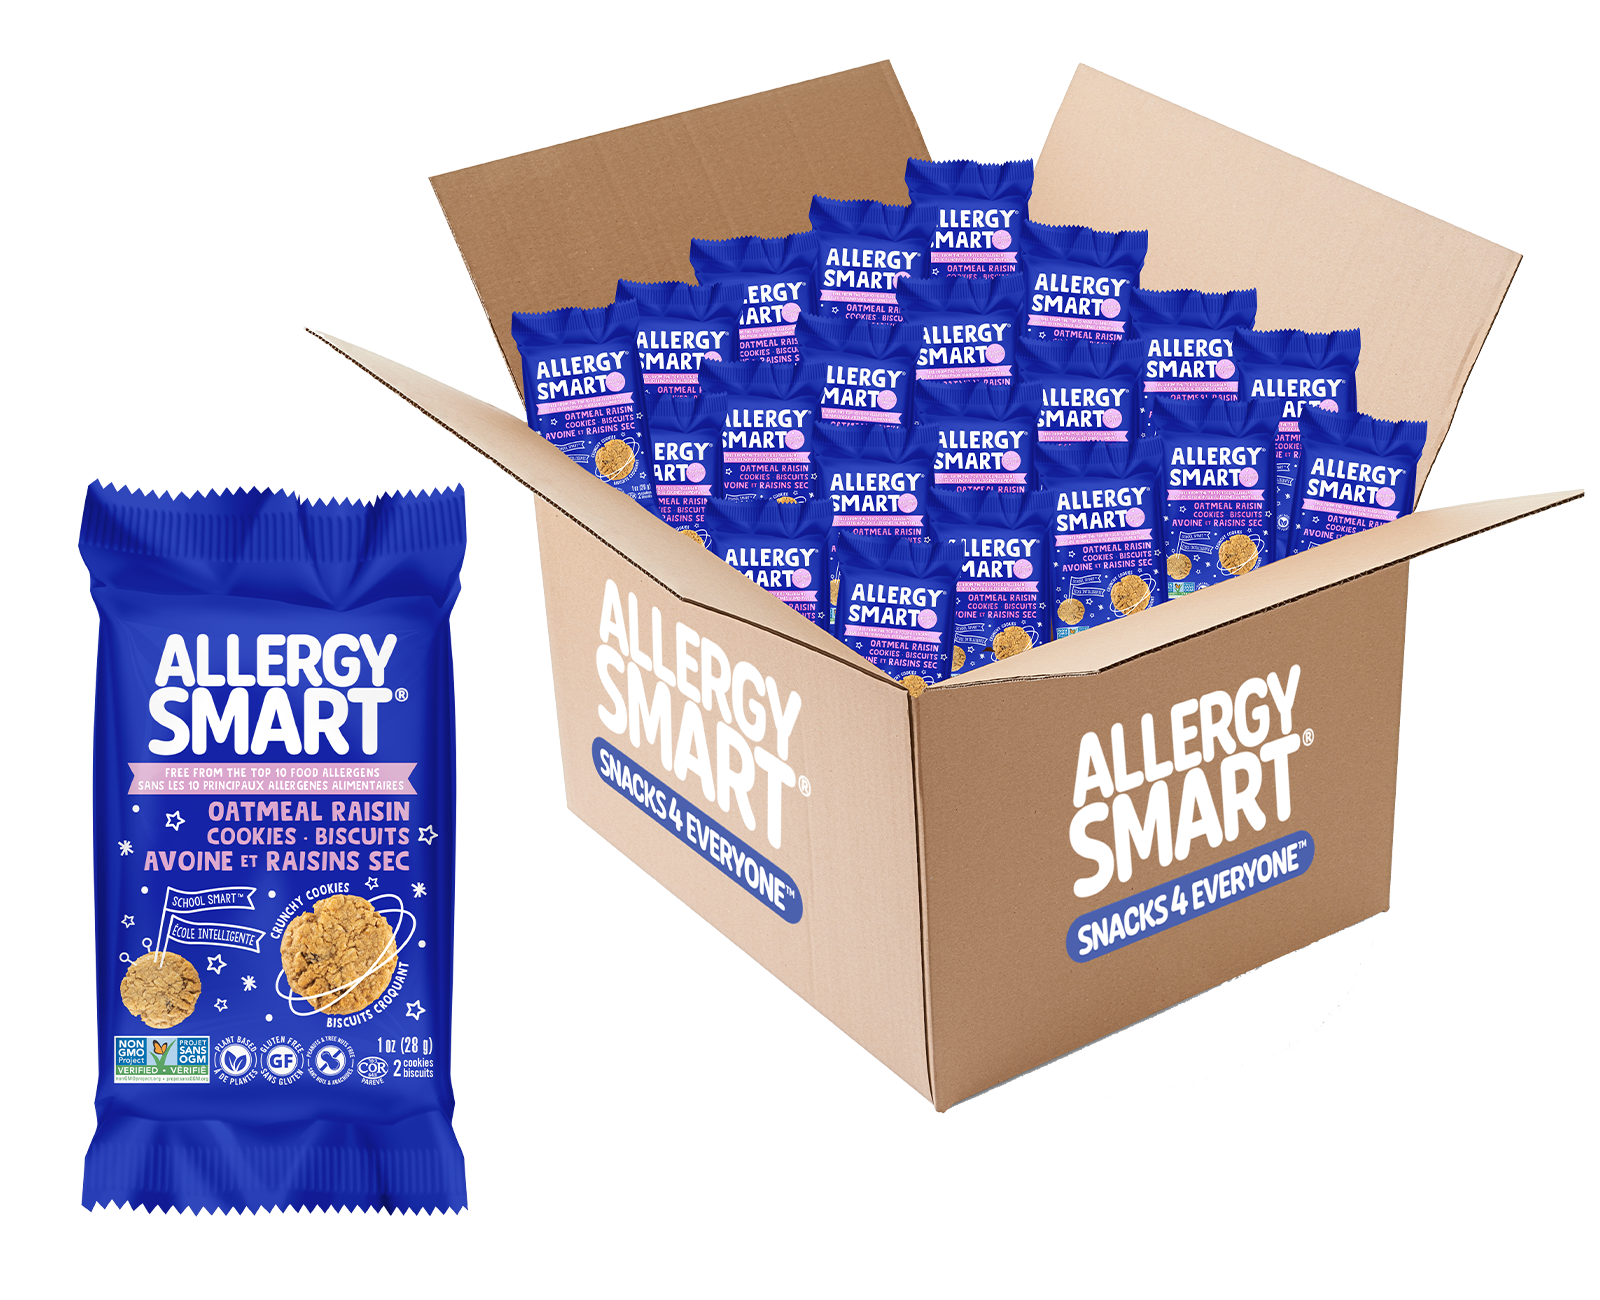 40 Individually Wrapped 2-Pack Cookies | Oatmeal Raisin - AllergySmart - Green Gourmand Foods Inc.